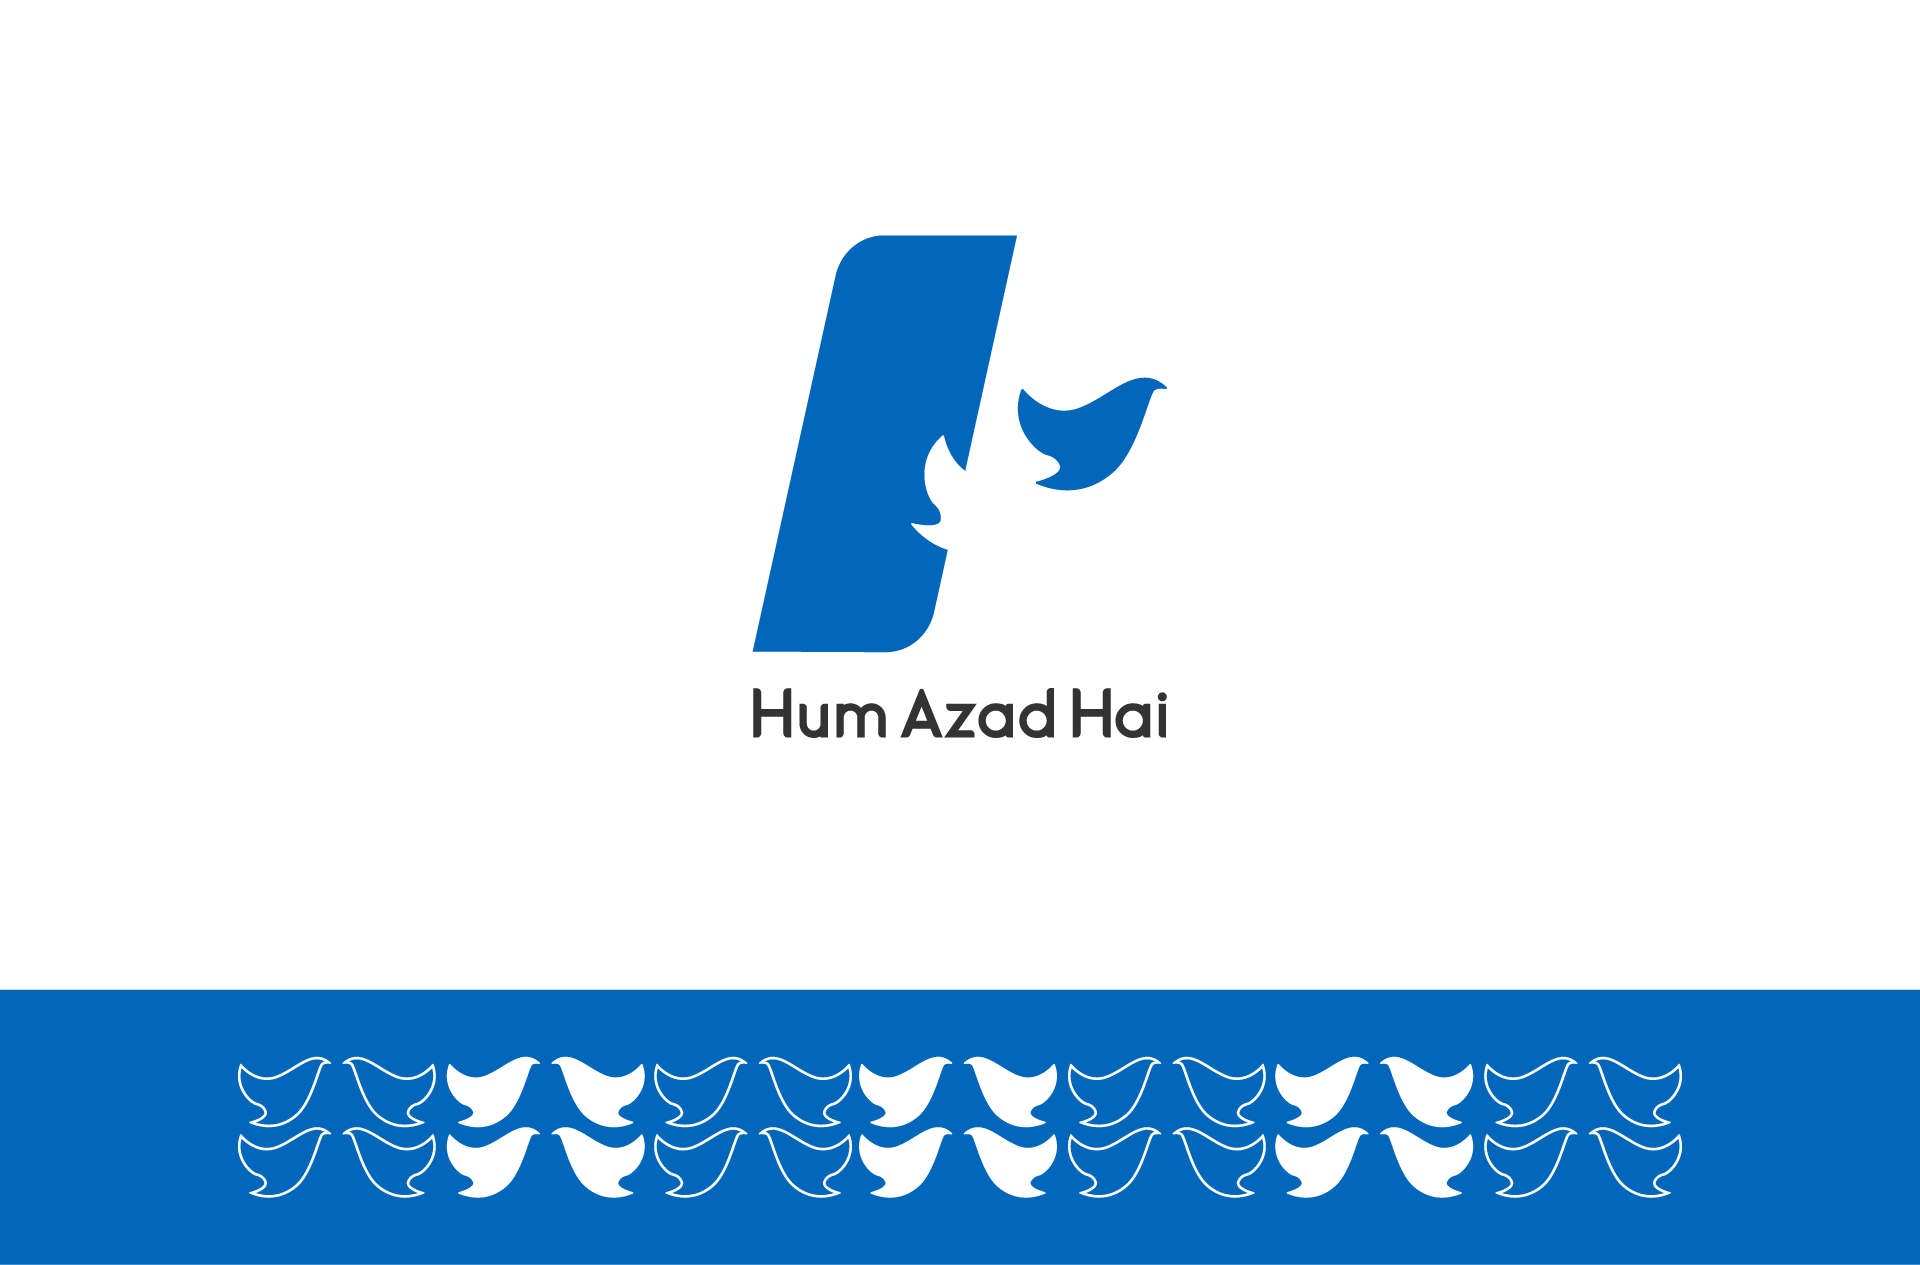 The logo of Hum Azad Hai with a pattern created with the bird in its logo